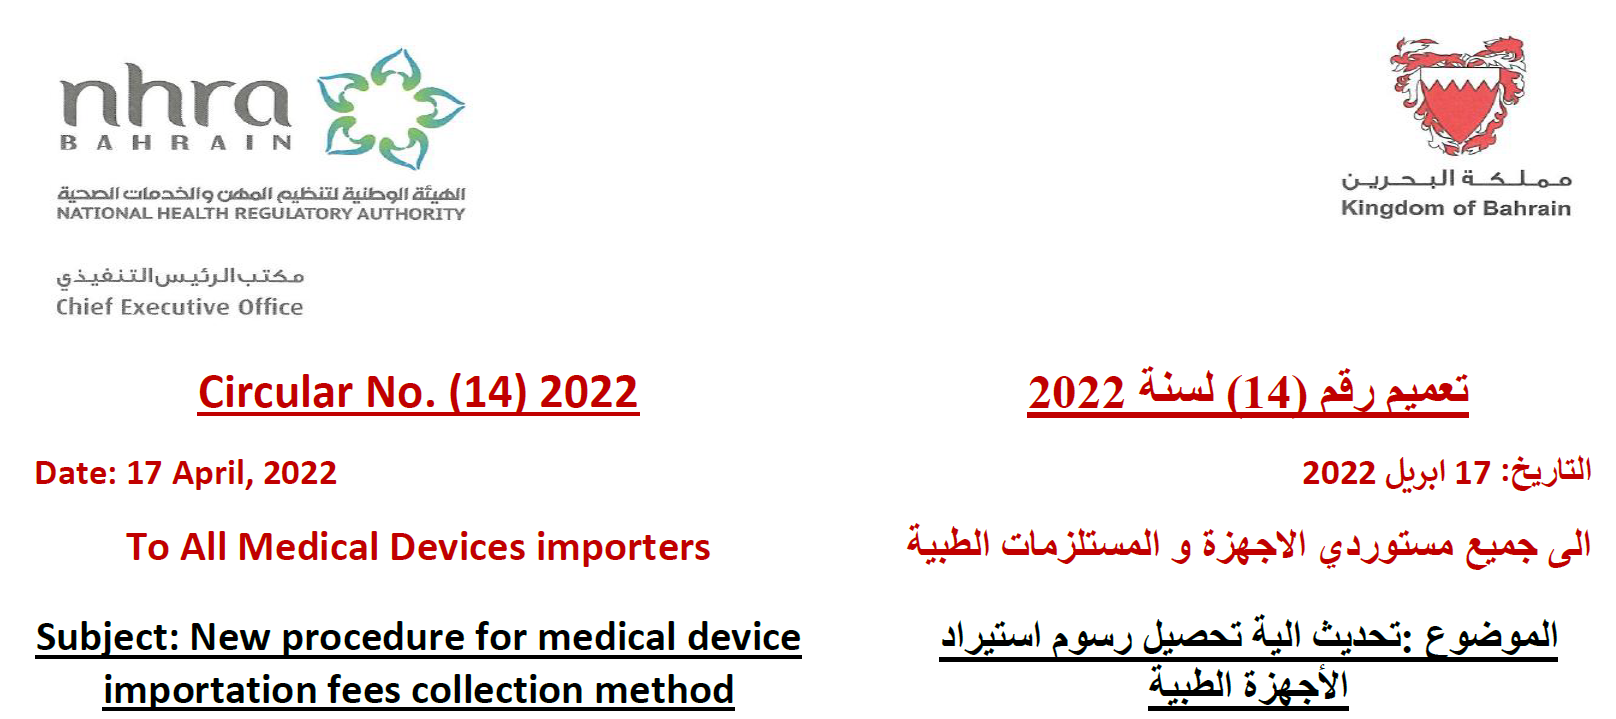 Circular No. (14) 2022: To All Medical Devices Importers - New Procedure for Medical Device Importation Fees Collection Method